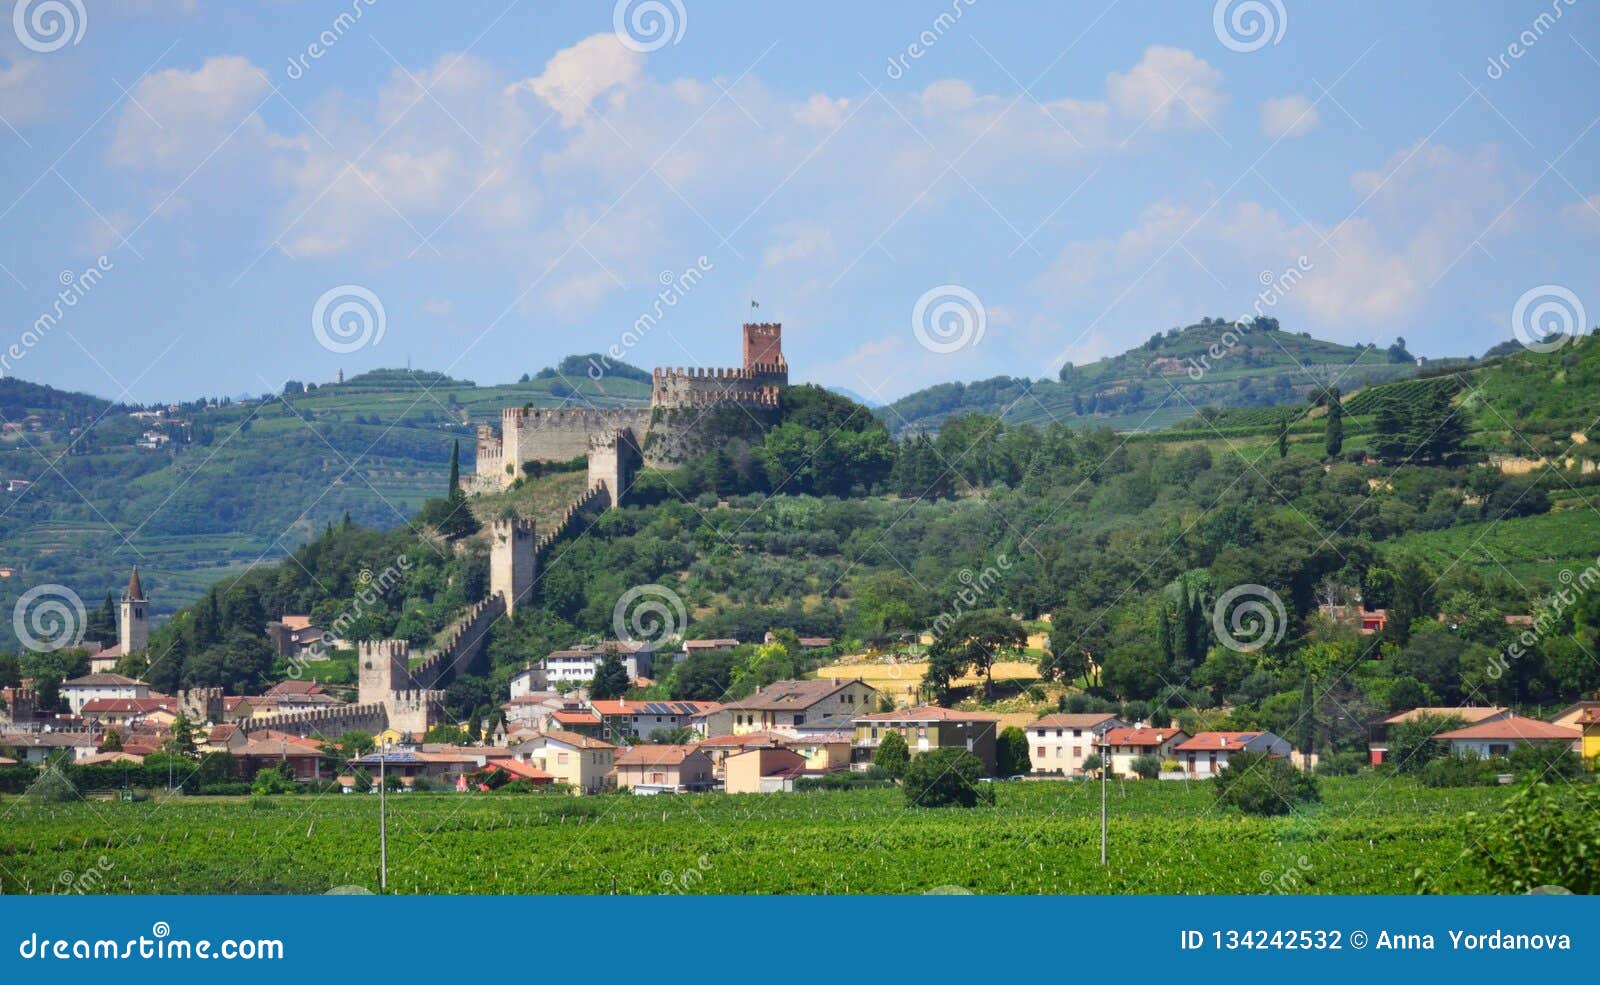 soave comune and medieval soave castle northern italy